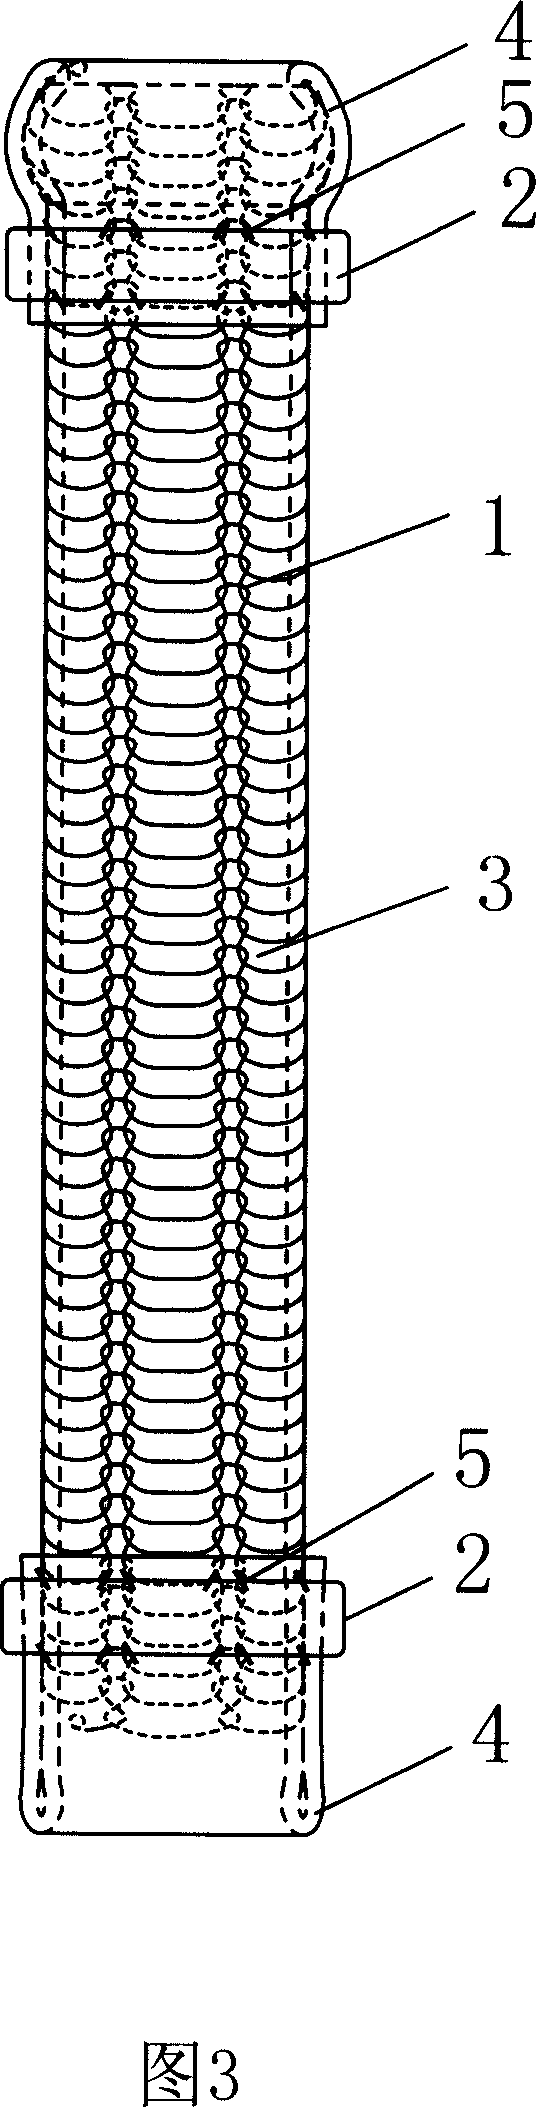 Artificial human body intracavity duct with buffer edge